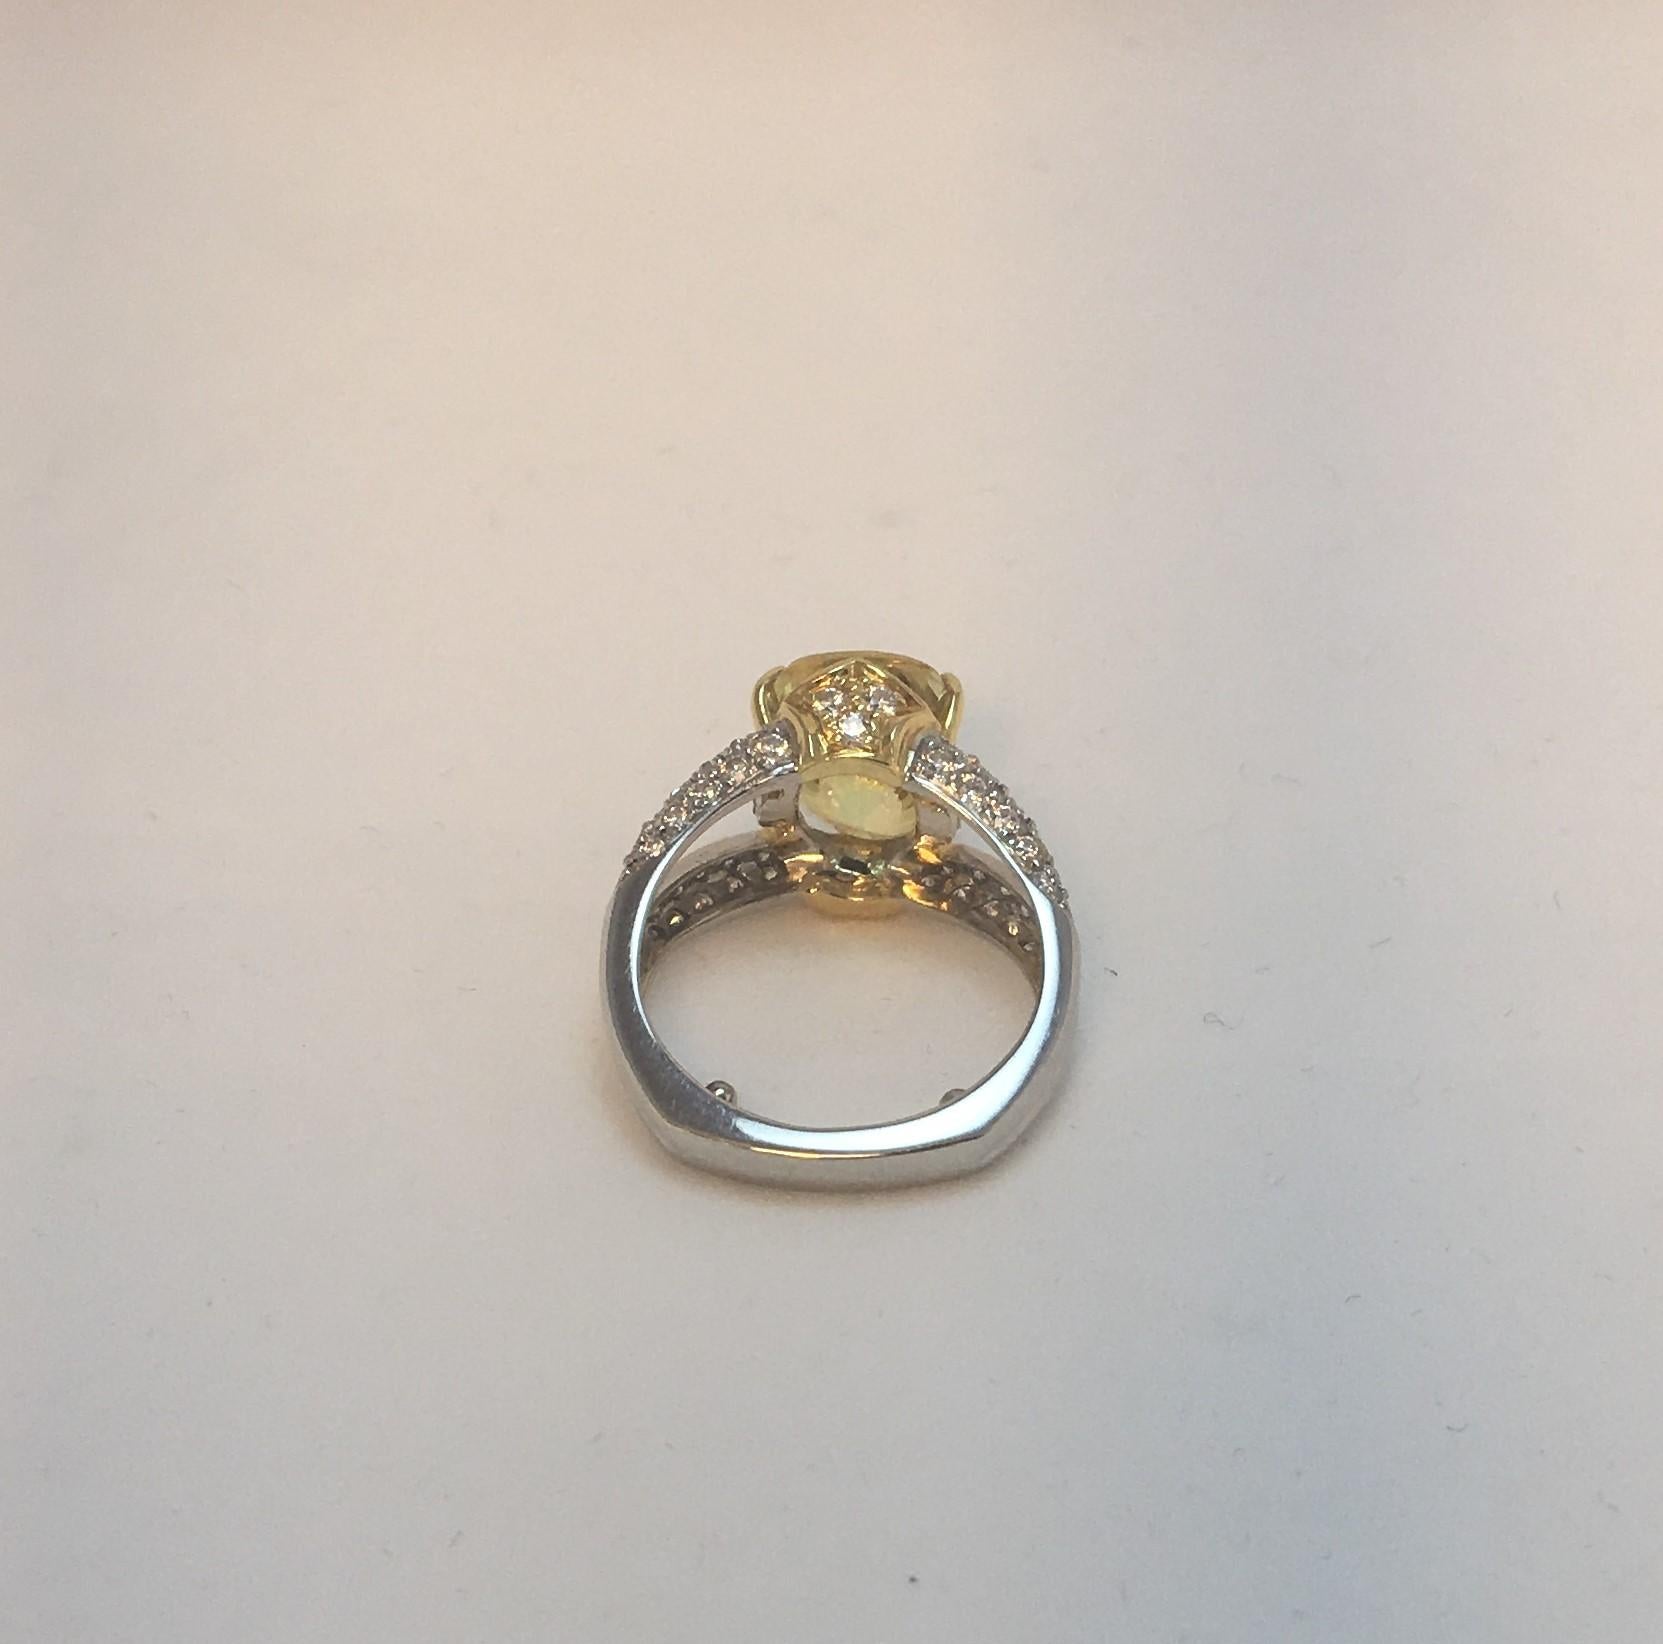 Richard Krementz Gemstones Designer
2006
Platinum and 18K Yellow Gold 
5.48 Carat Oval Natural Color Yellow Sapphire
.64 diamond total weight, round, set in shank and under yellow sapphire 
Split shank
Size 6 with sizing beads (fits like a size 5.75)